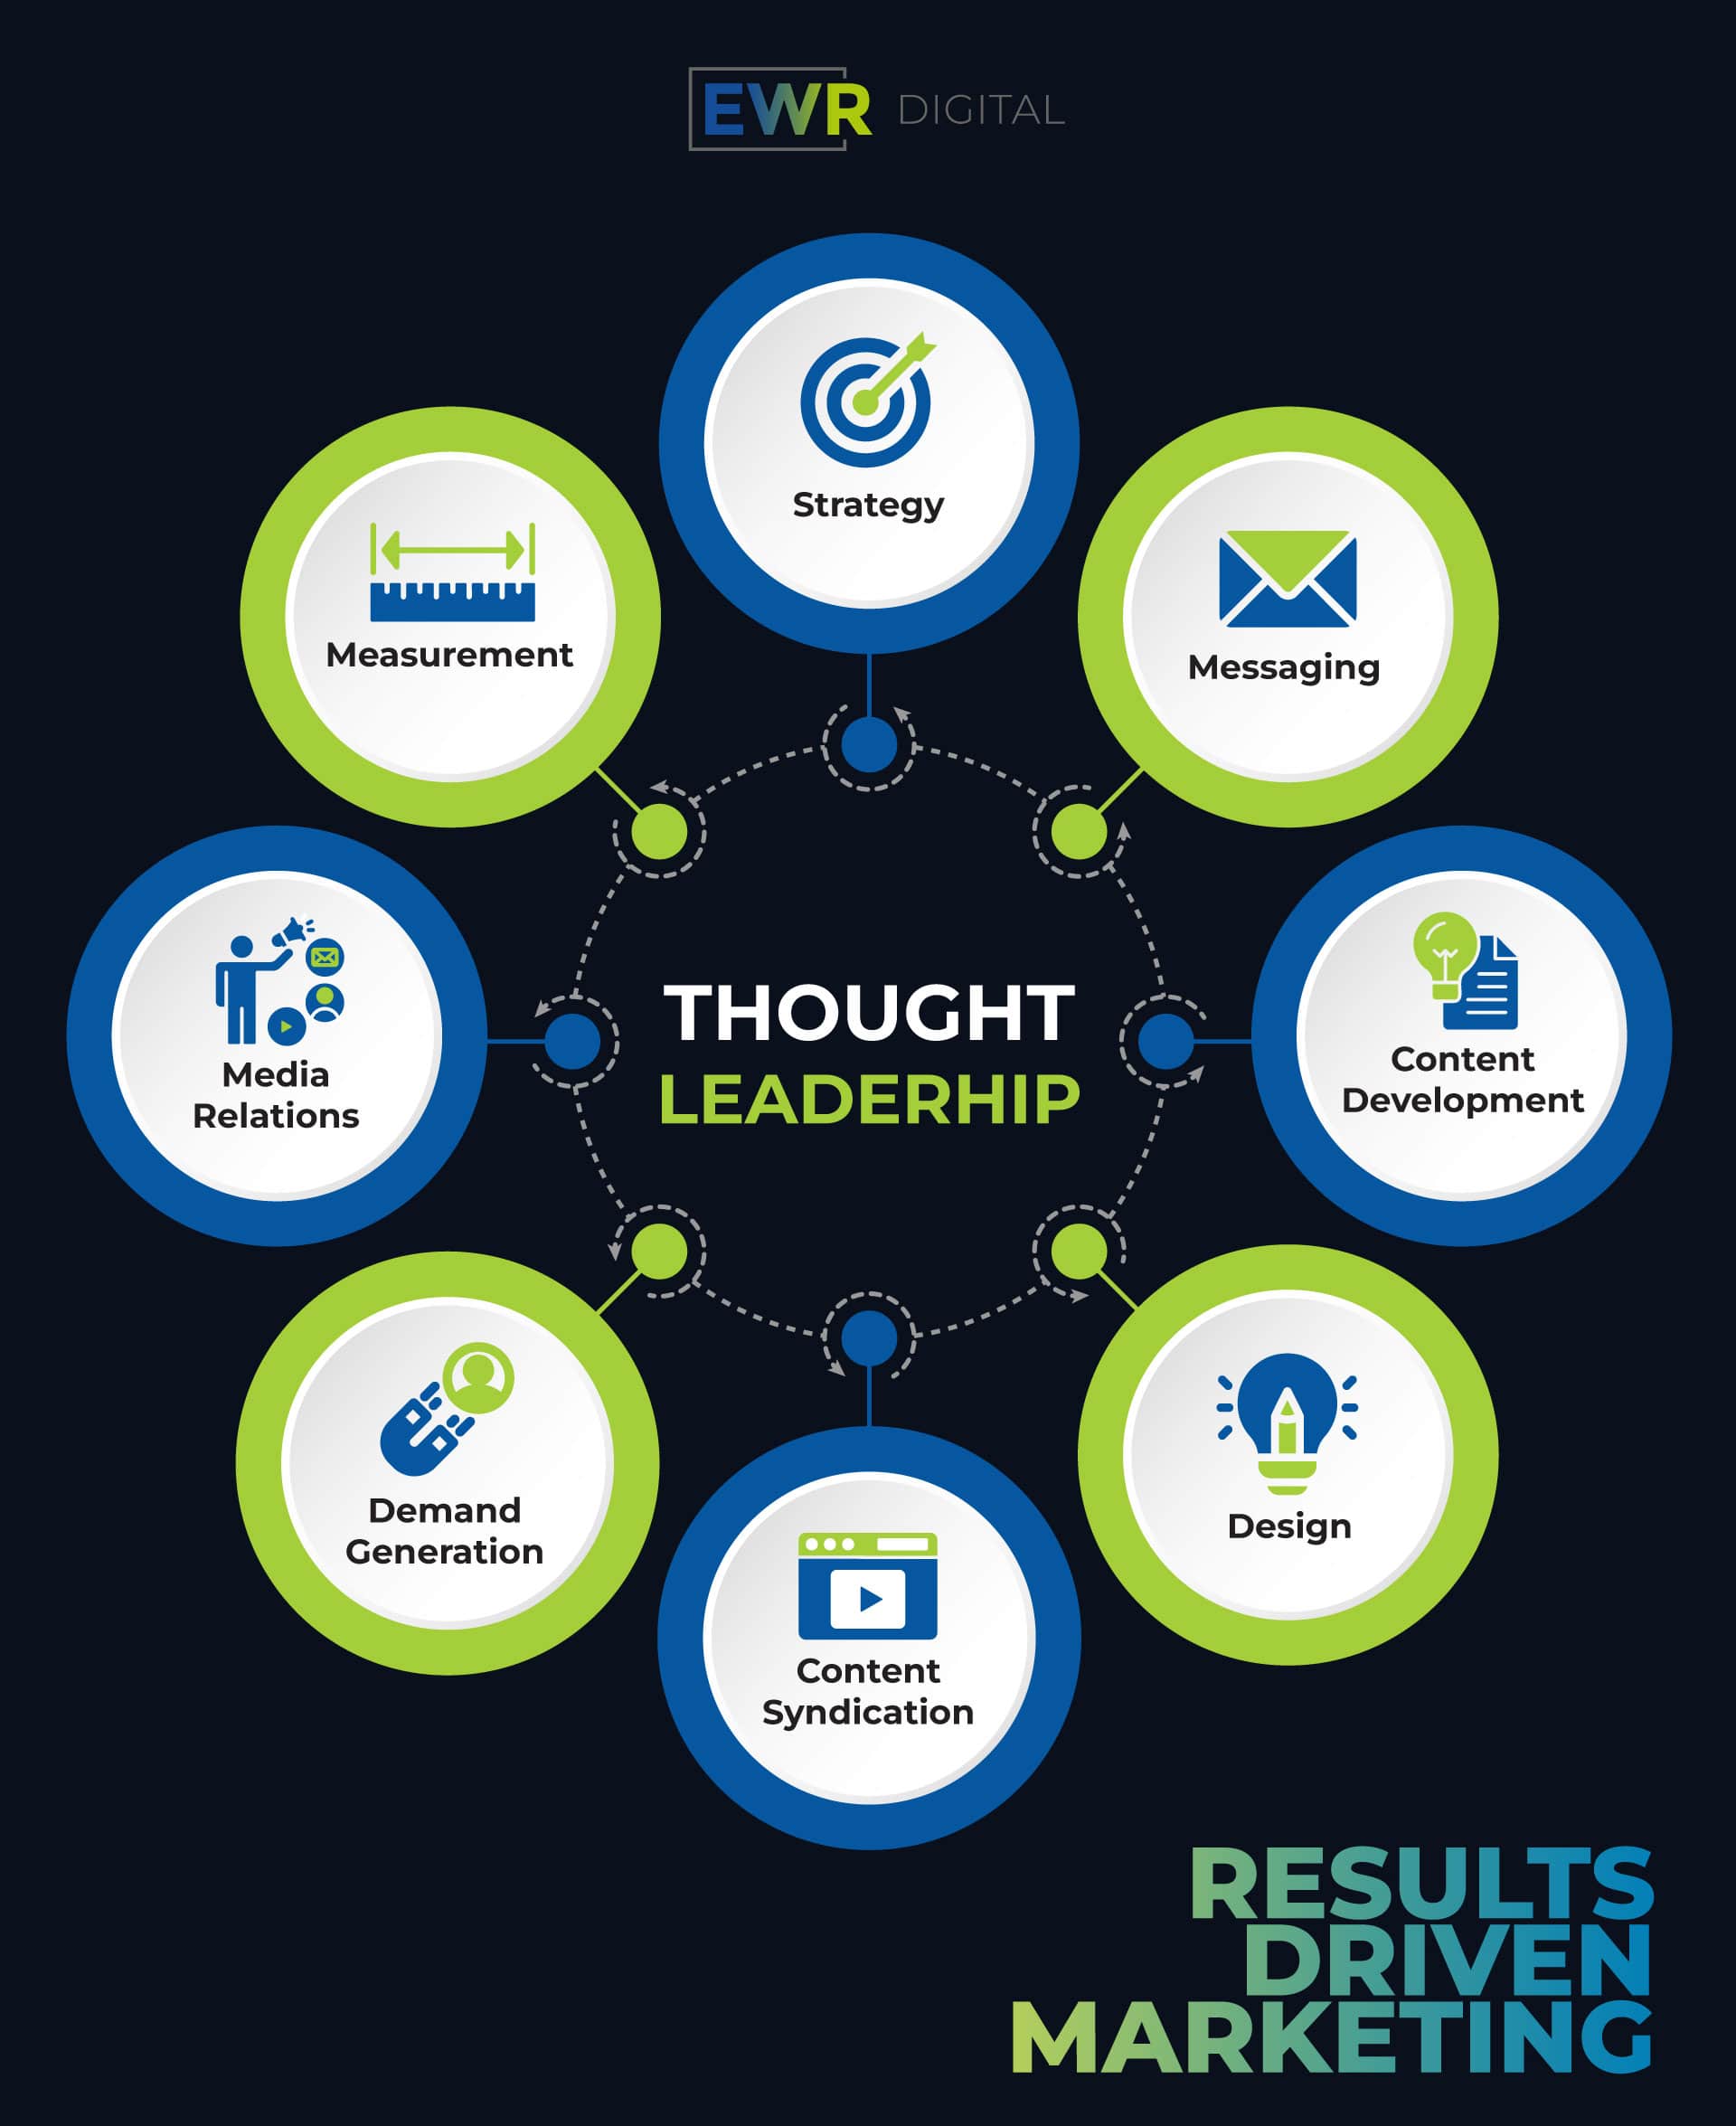 Thought Leadership Components, strategy, messaging, content development, design, content syndication, demand generation, media relations, measurement